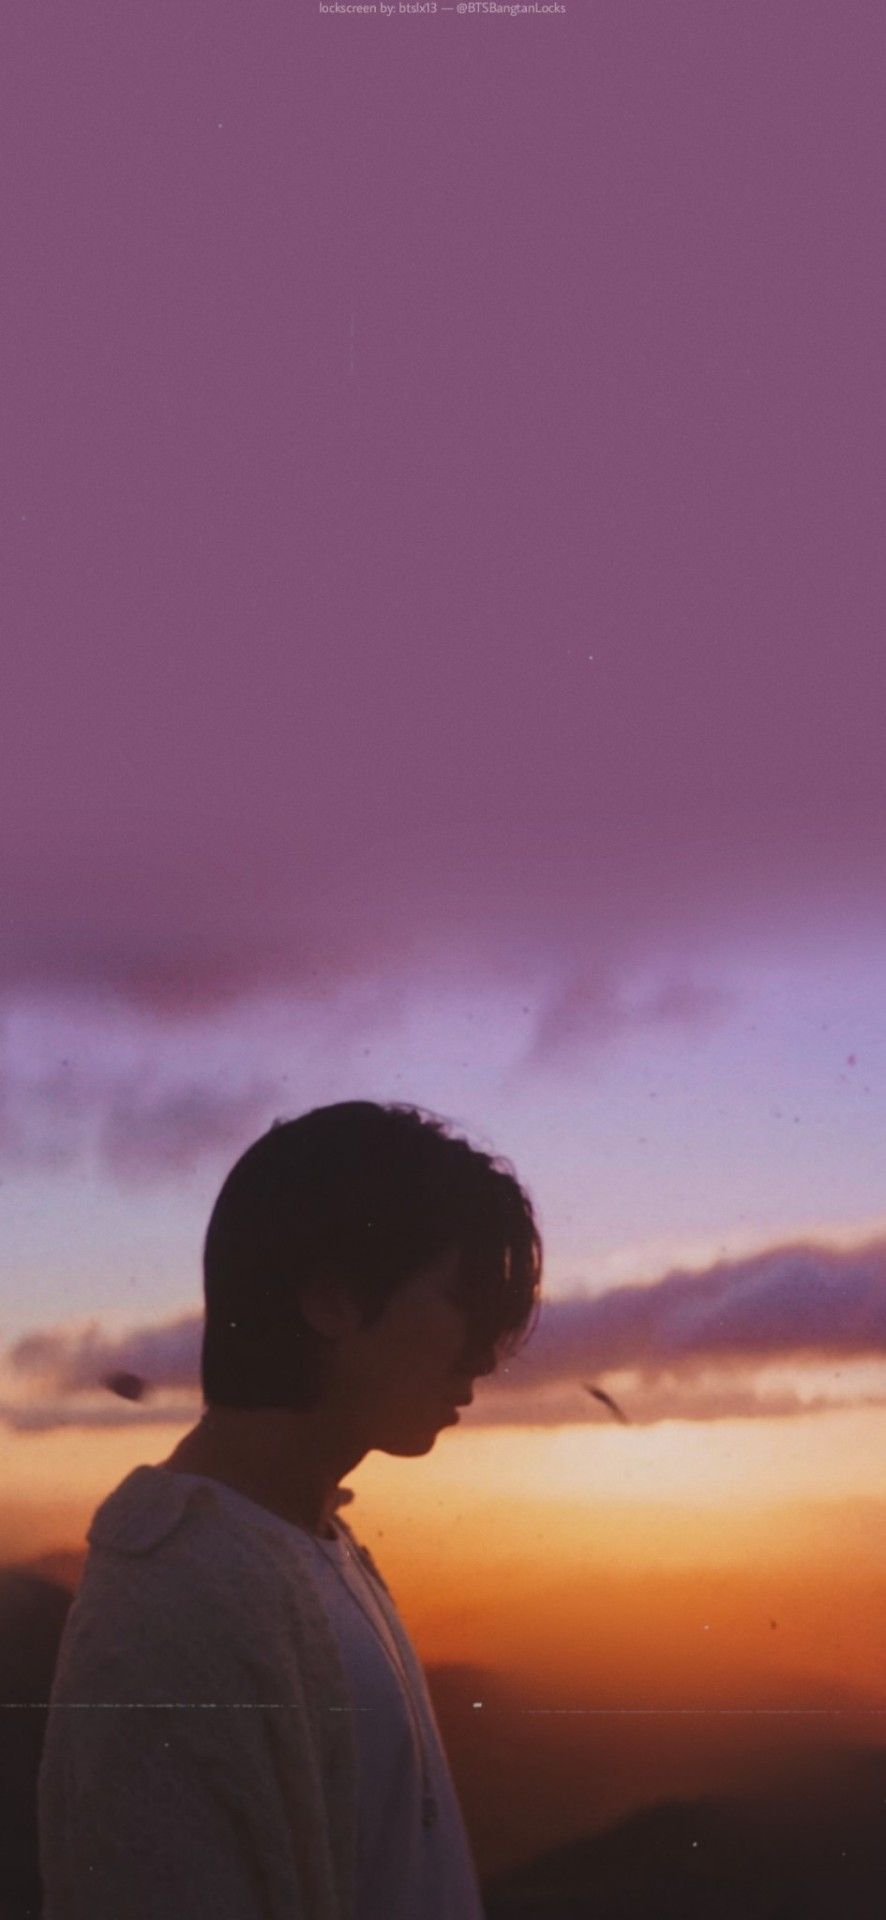 A purple and orange sunset with a boy looking down at the ground. - Indigo